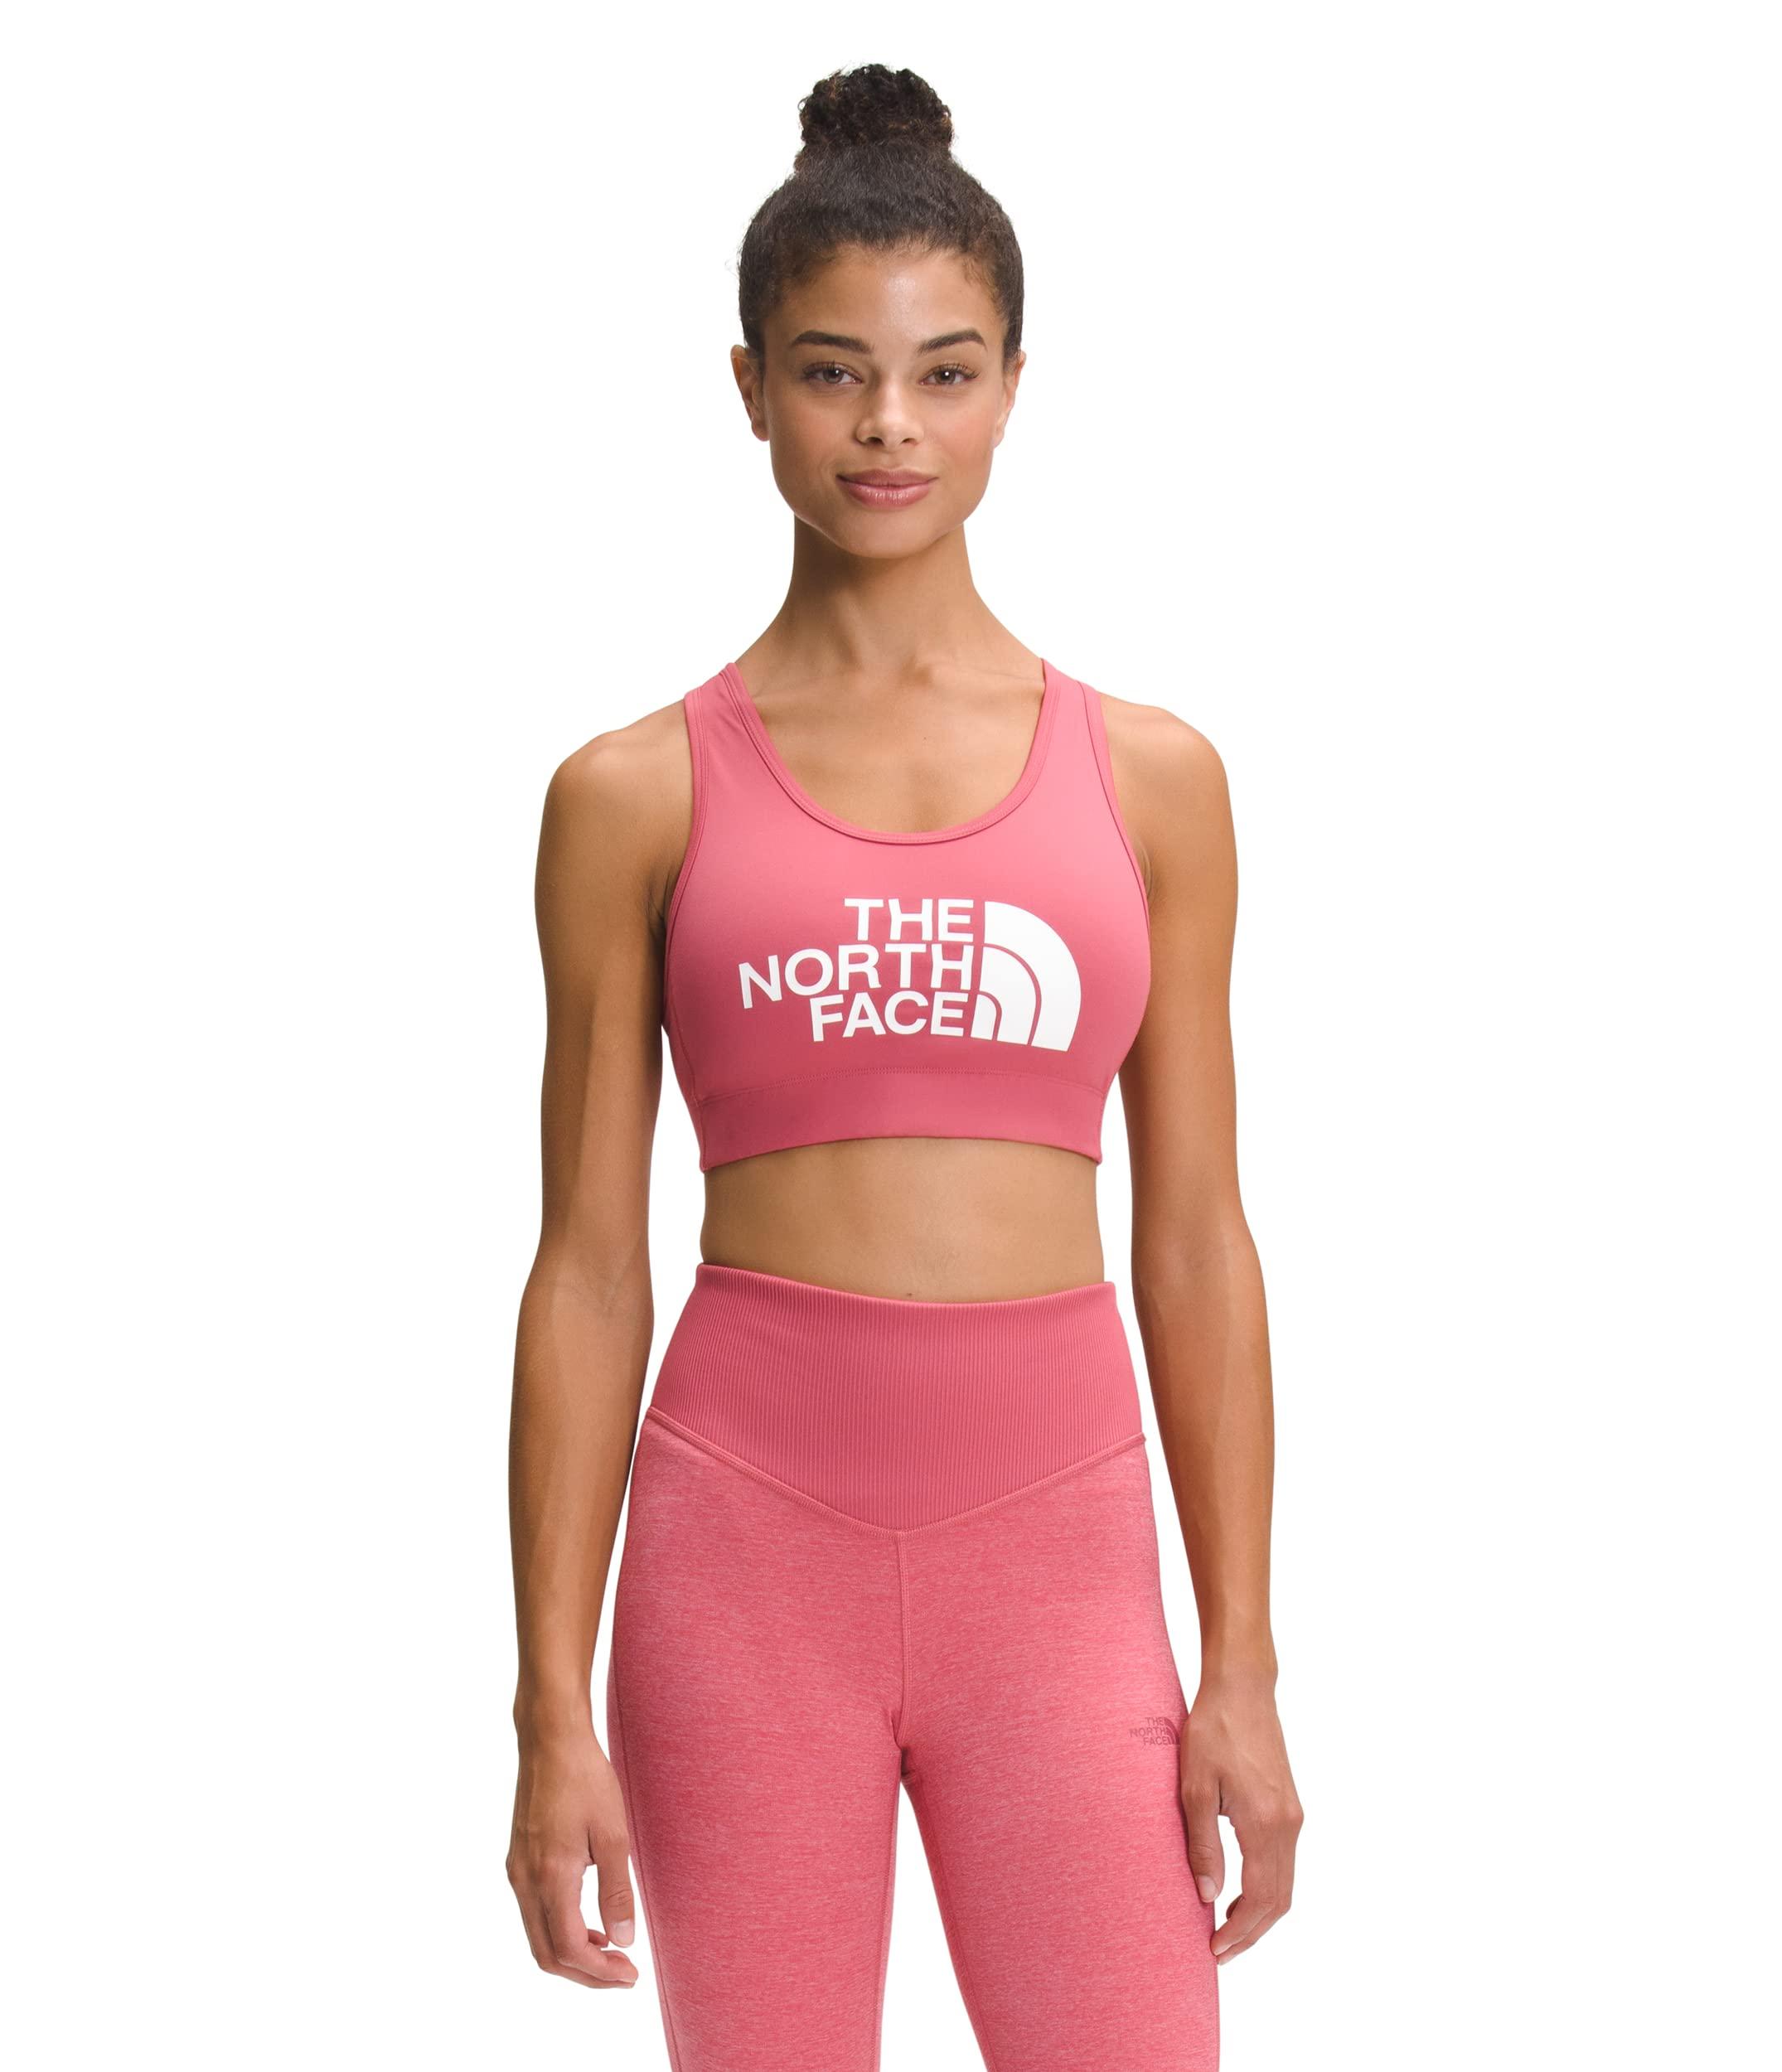 The North Face Midline Bra Slate Rose 2xl in Pink